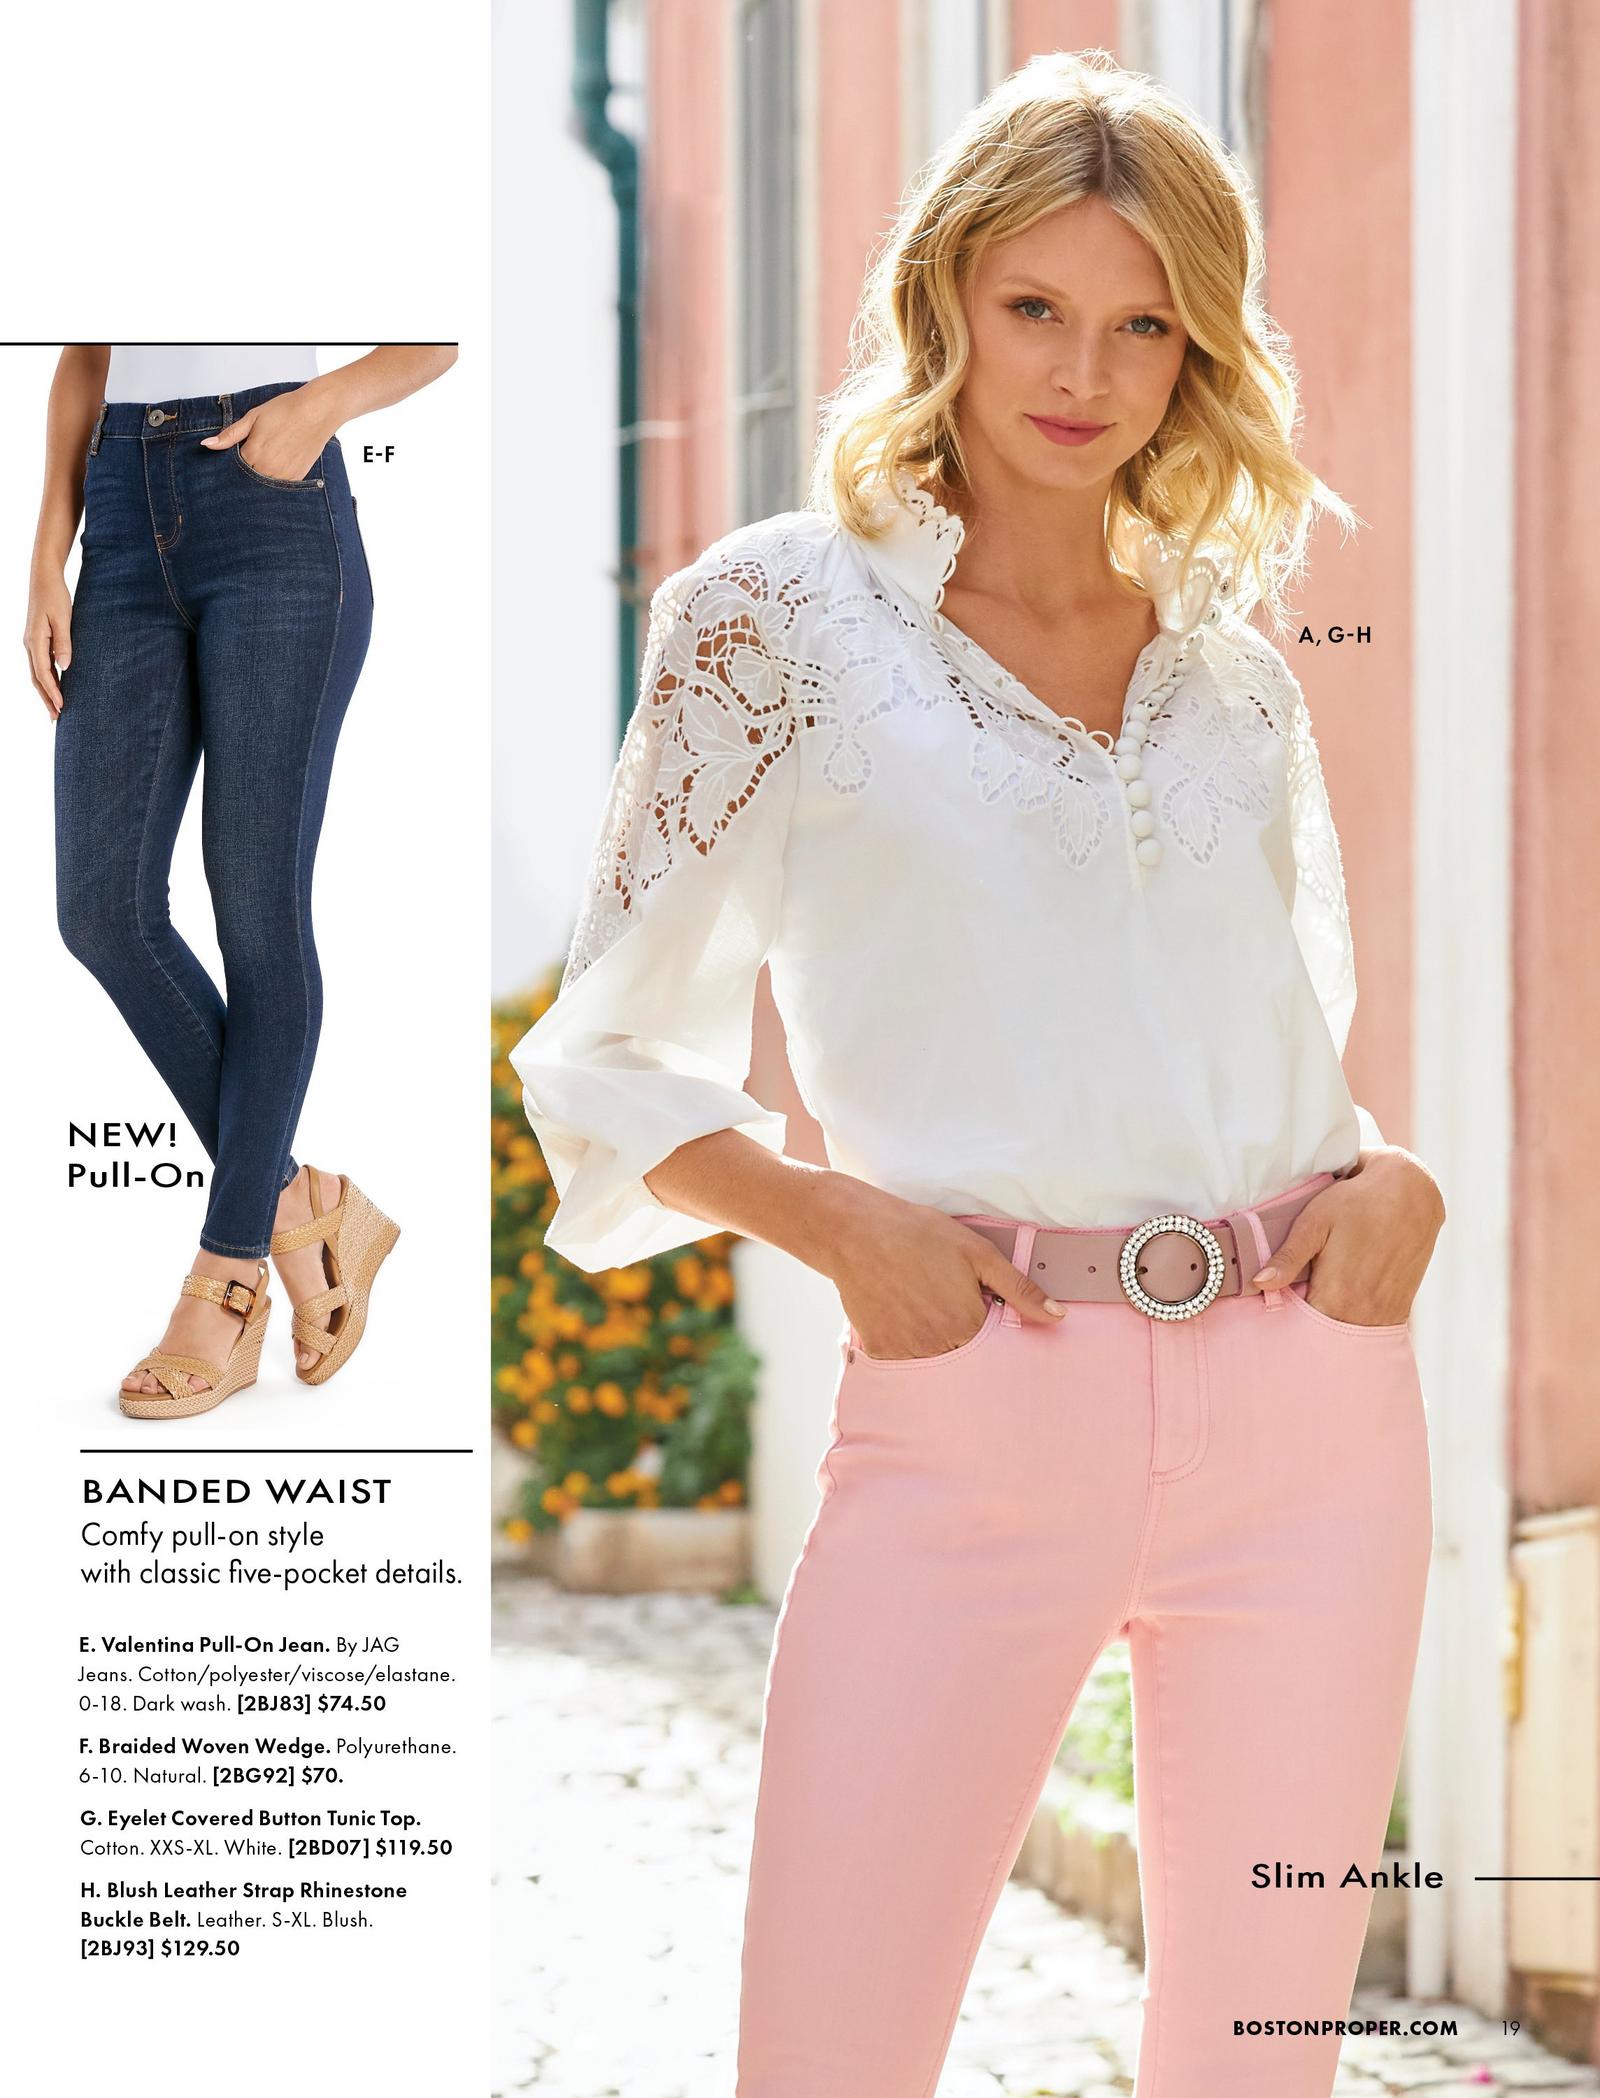 right model wearing dark wash skinny jeans and tan wedges. right model wearing a white lace embellished covered button top, rhinestone embellished pink belt, and pink jeans.